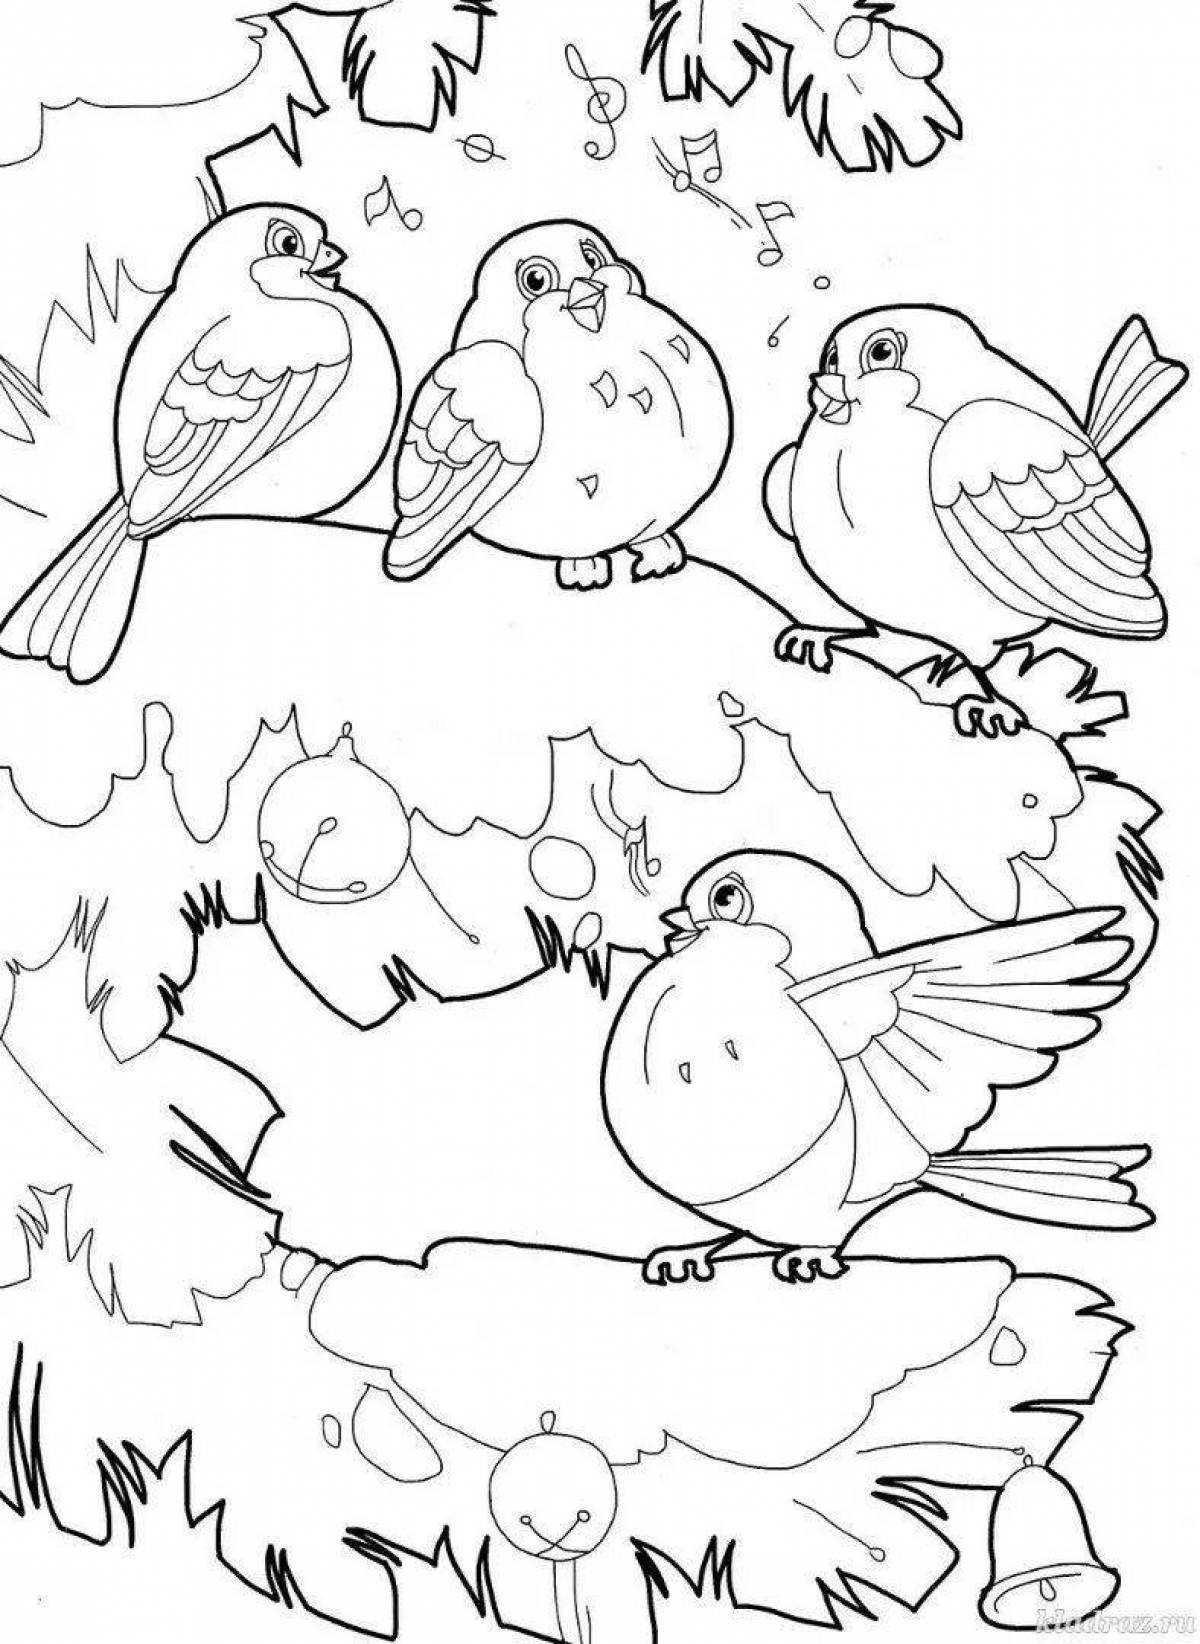 Gorgeous bird coloring book for children 5-6 years old